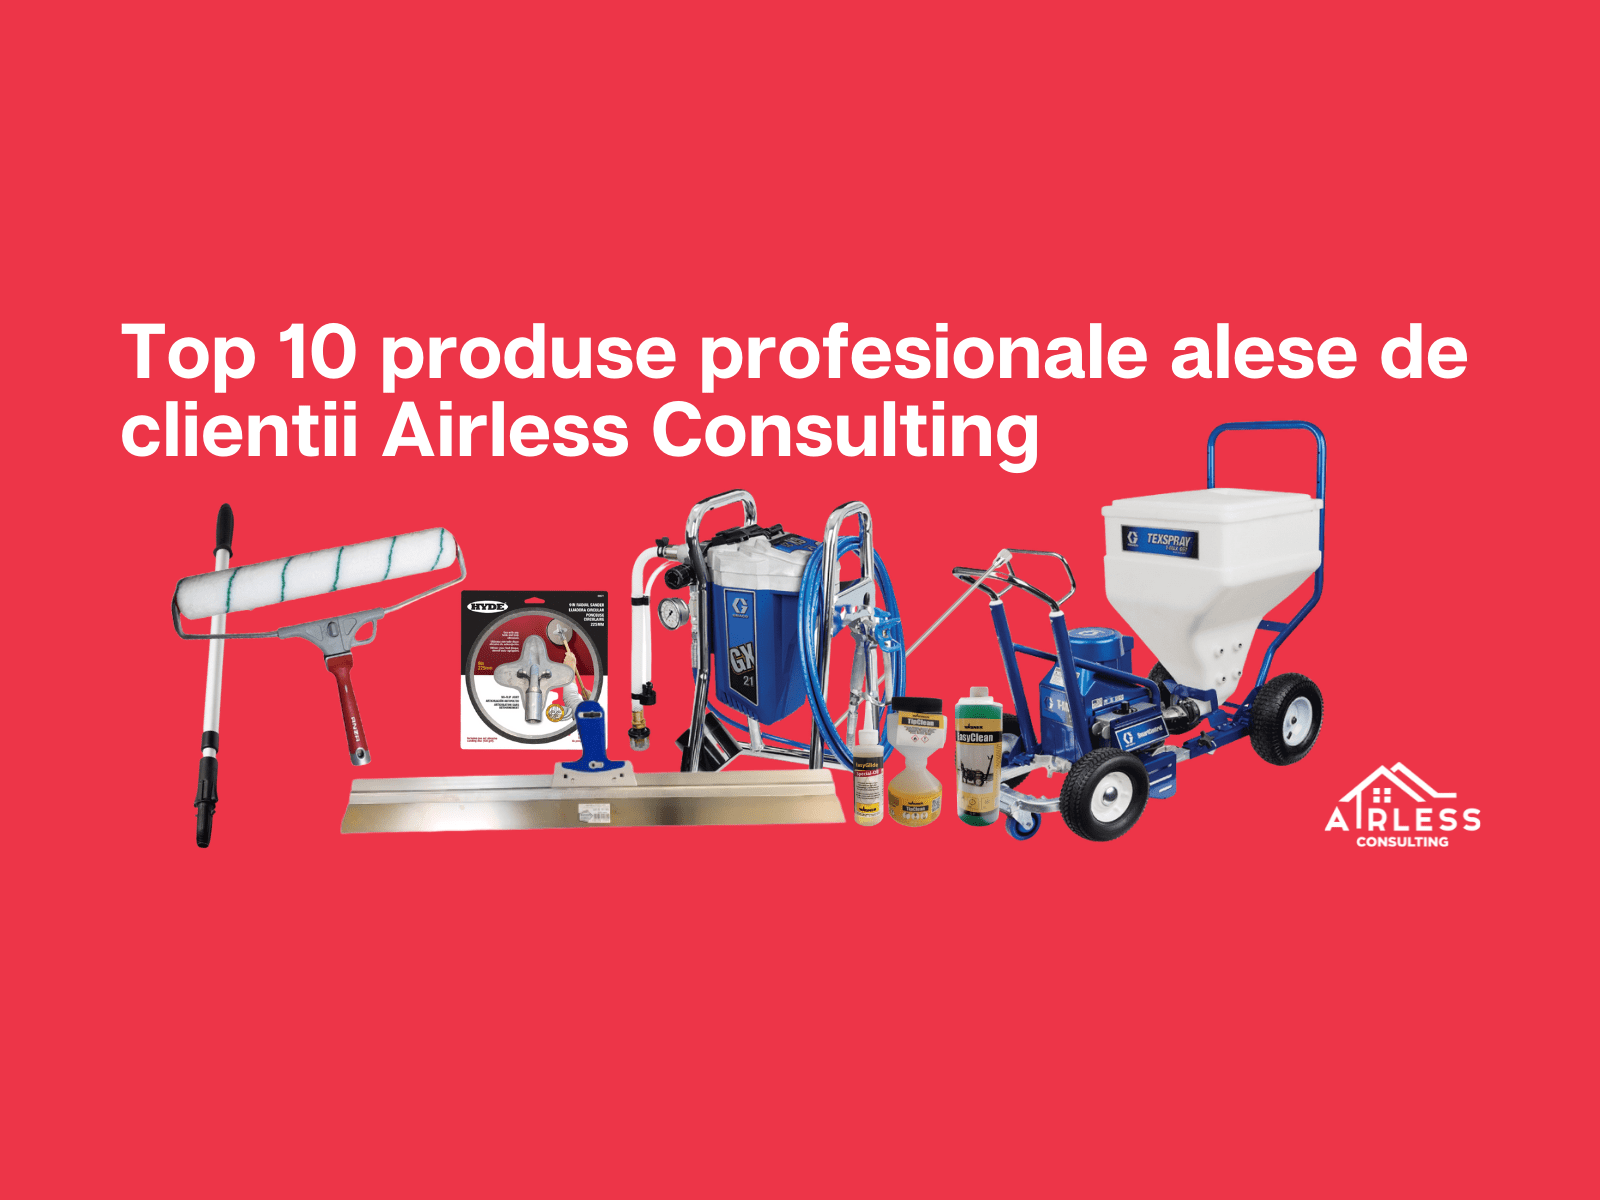 Top 10 produse profesionale alese de clientii Airless Consulting